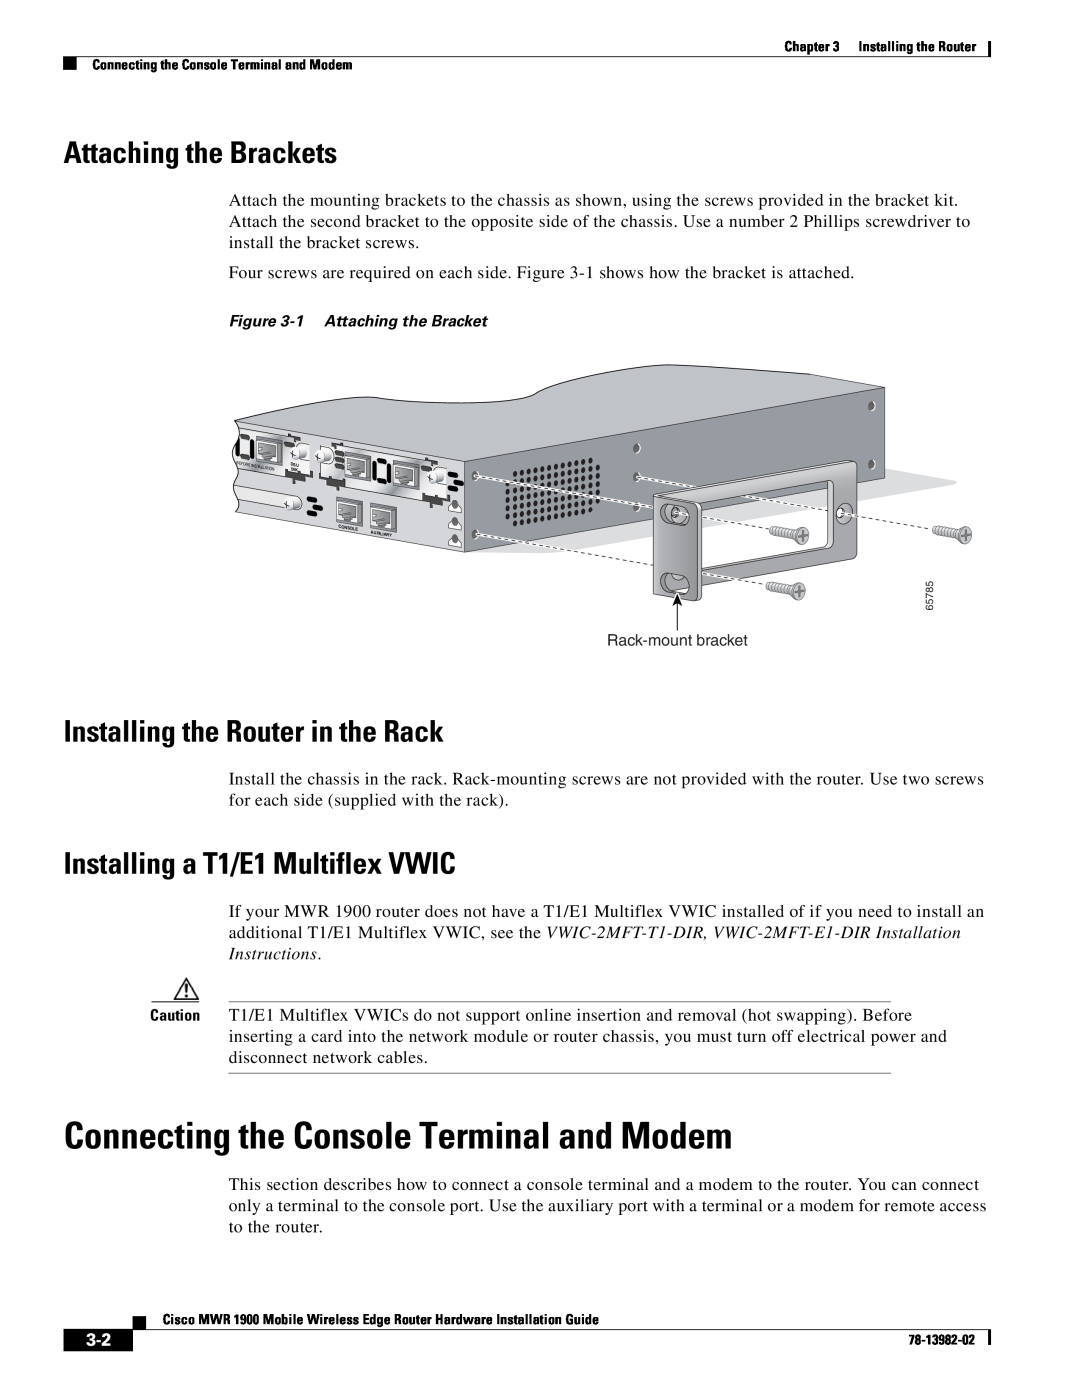 Cisco Systems MWR 1900 manual Connecting the Console Terminal and Modem, Attaching the Brackets 